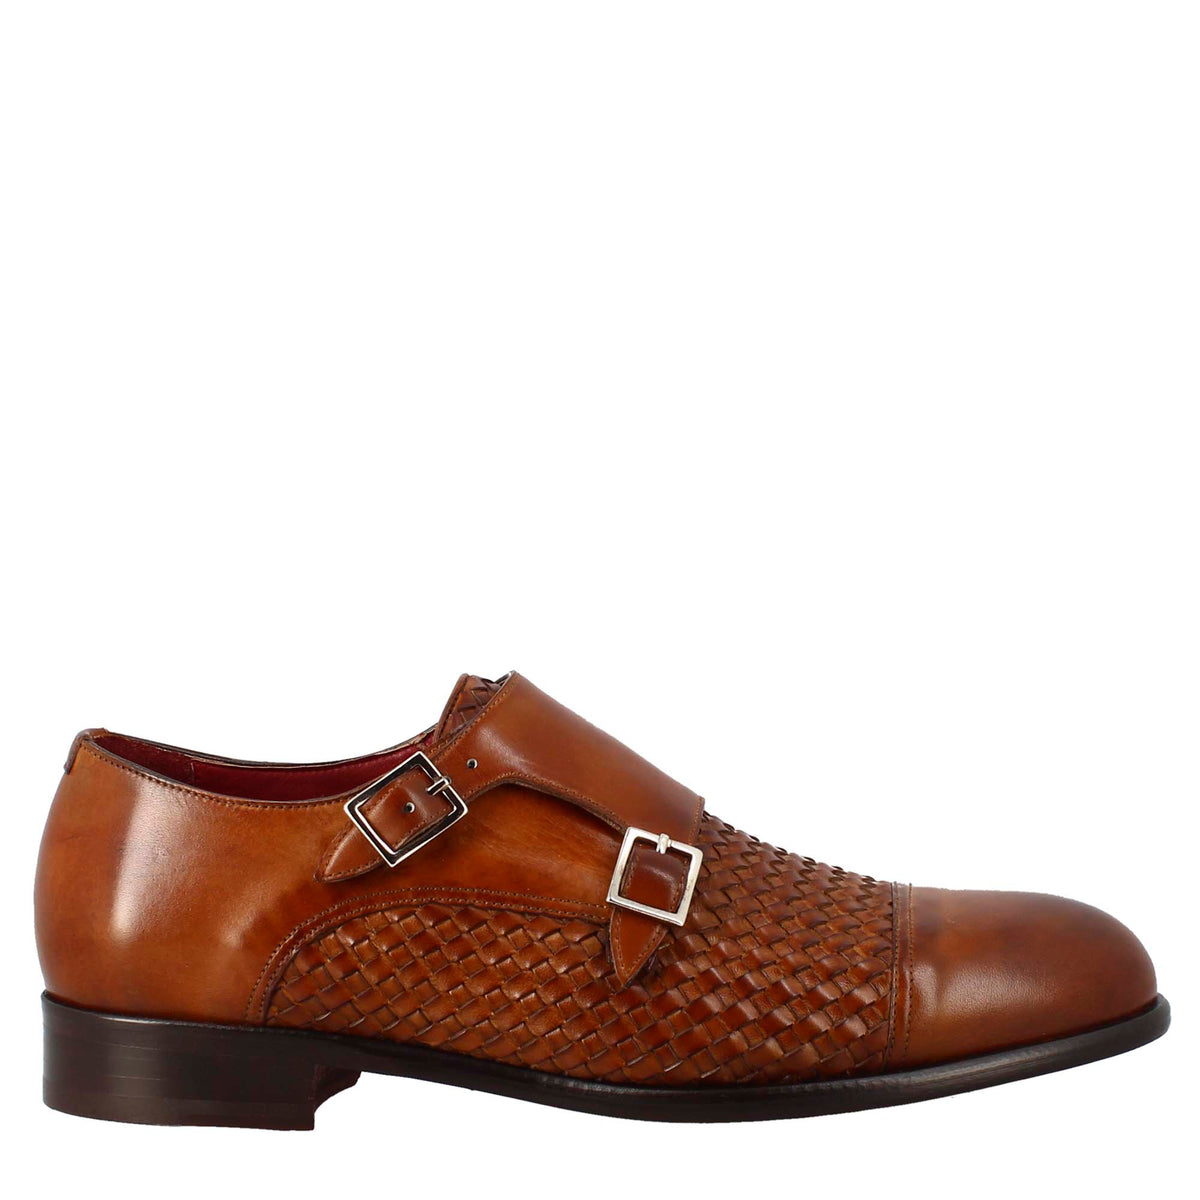 Men's double buckle shoe in sienna brown woven leather